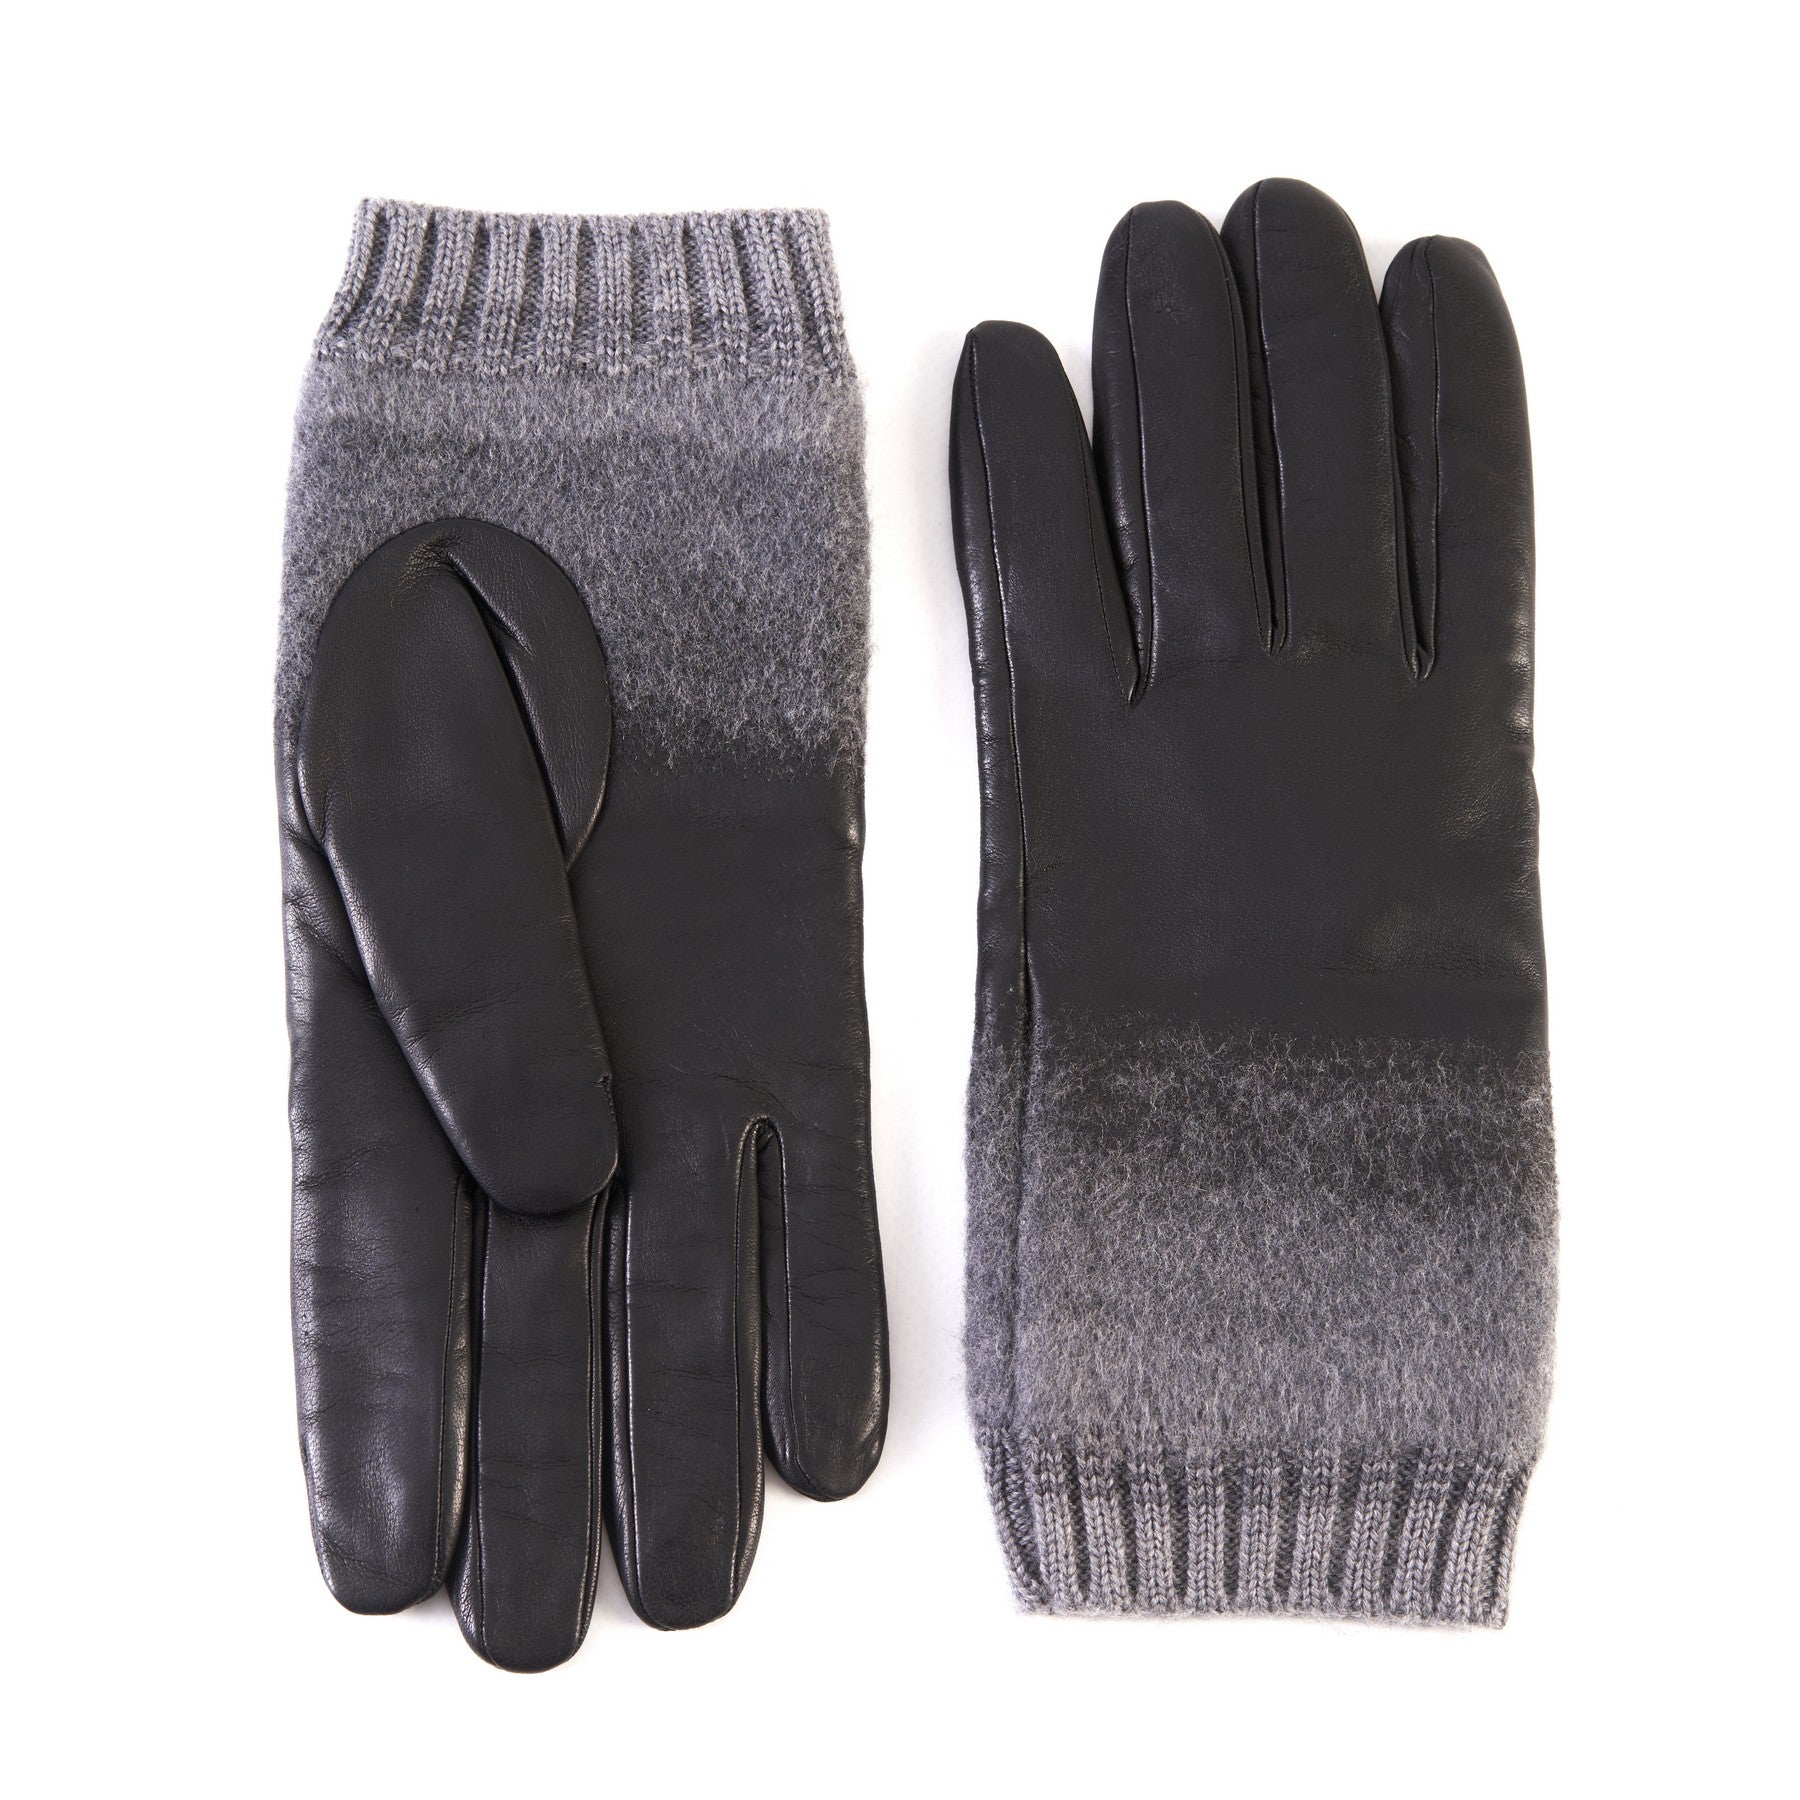 Men's black nappa leather gloves with wool needle punch details